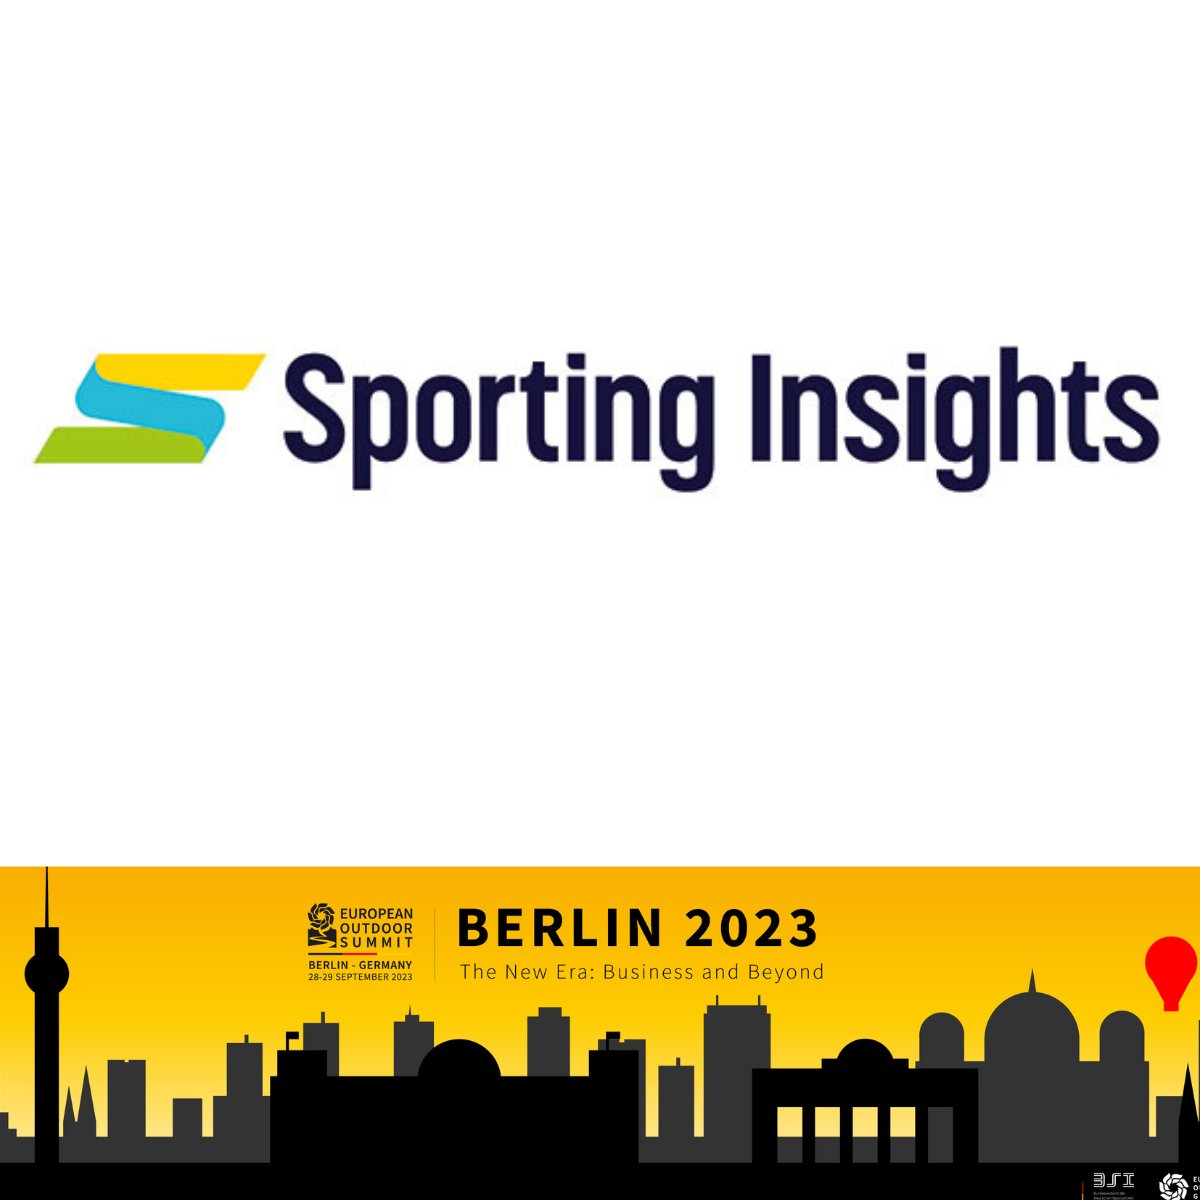 Thank you to Sporting Insights for coming on board for another Summit as a Sponsor. #eos2023 #outdoorindustry #thankyou #sponsors